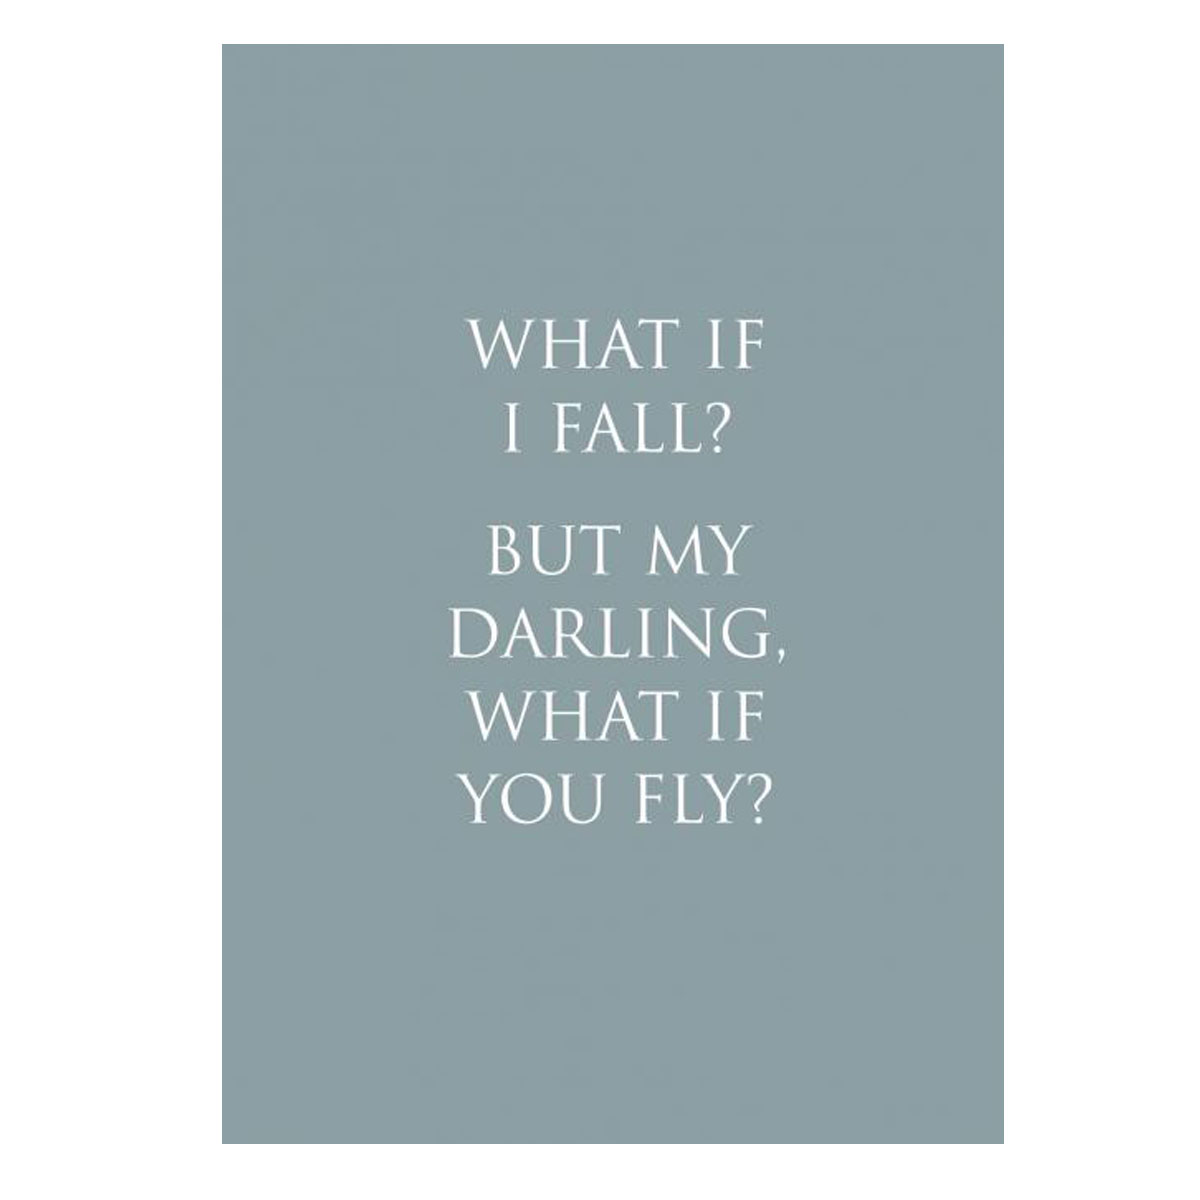 Kunstdruck "What if I fall? But my Darling, what if you fly?" von Wunderwort